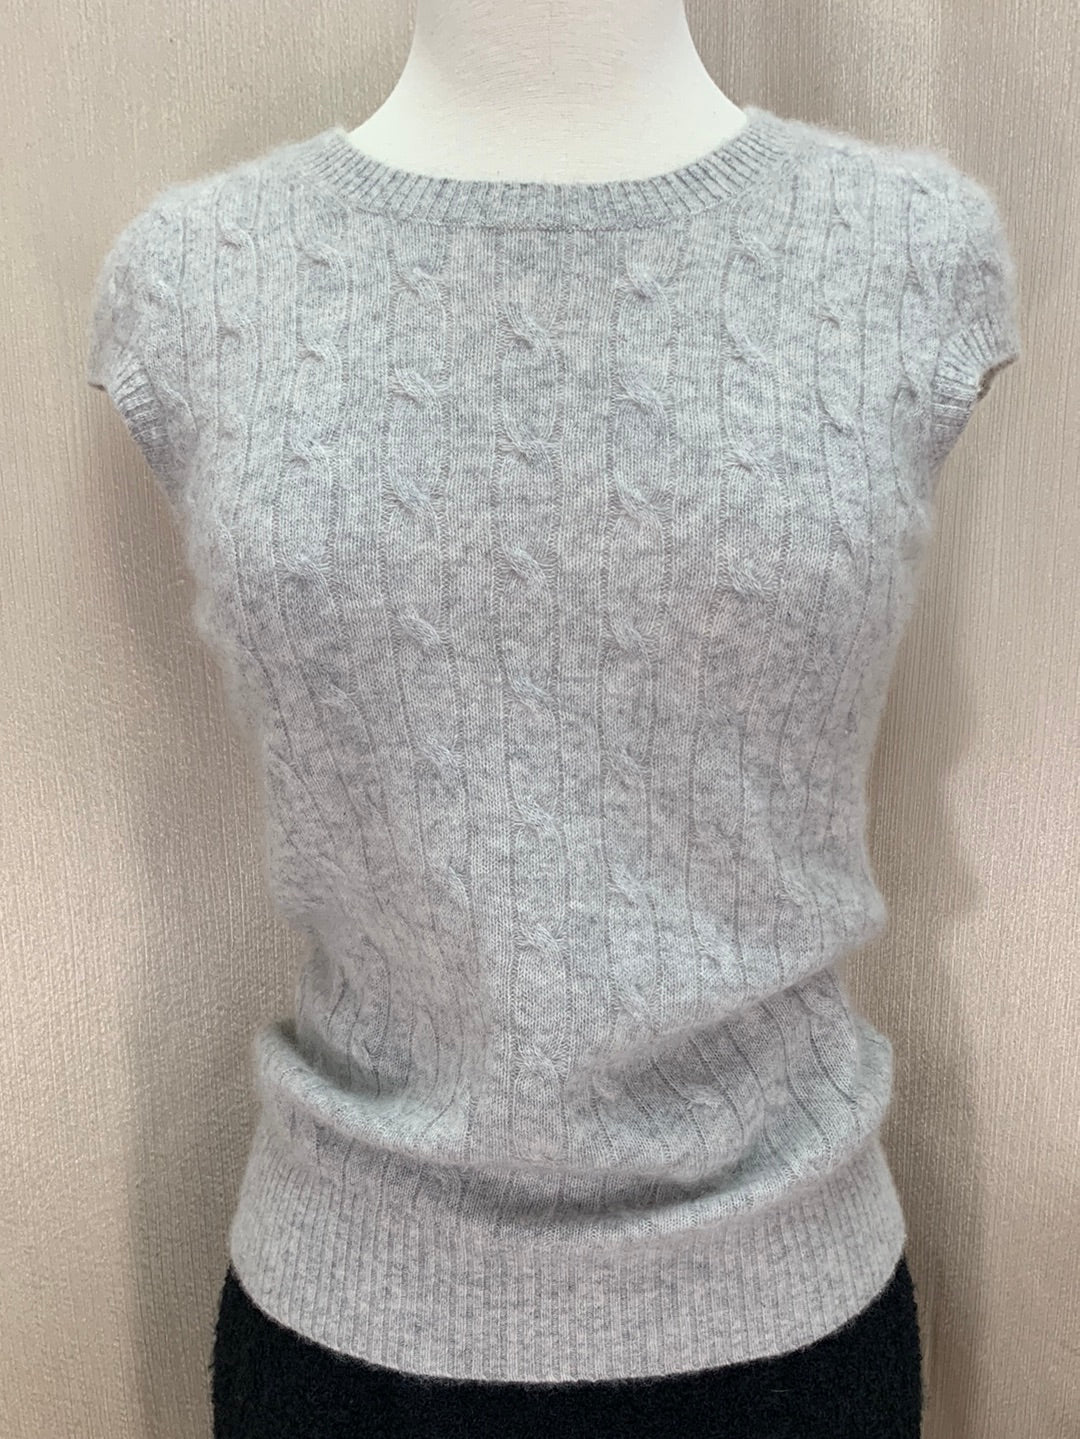 CHRISTOPHER FISCHER marled gray Cashmere Thin Cable Knit Sweater - M